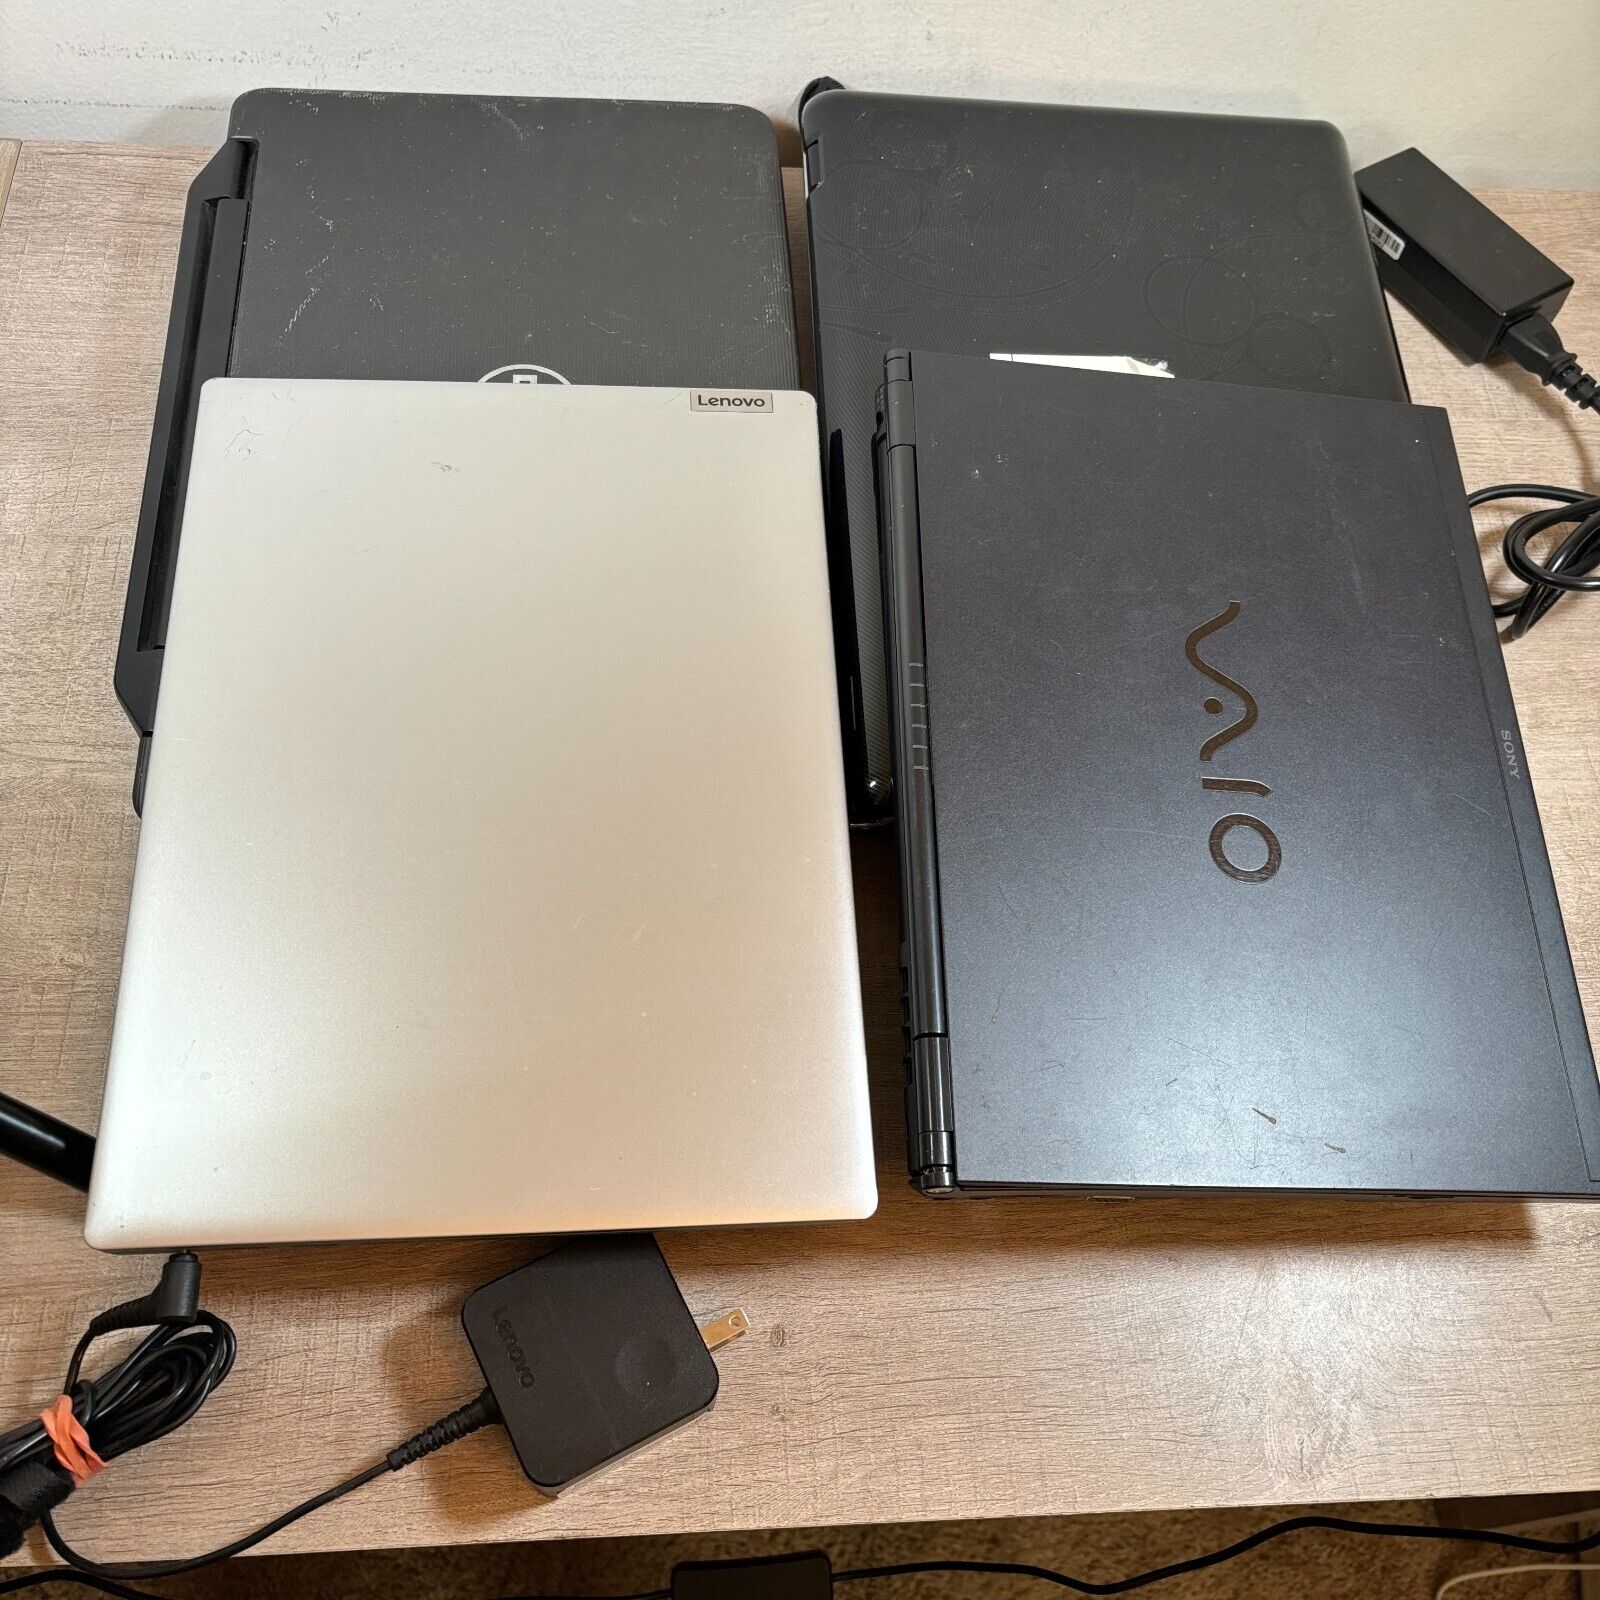 Lot of 4 Laptop Computers Lenovo Vaio Dell HP